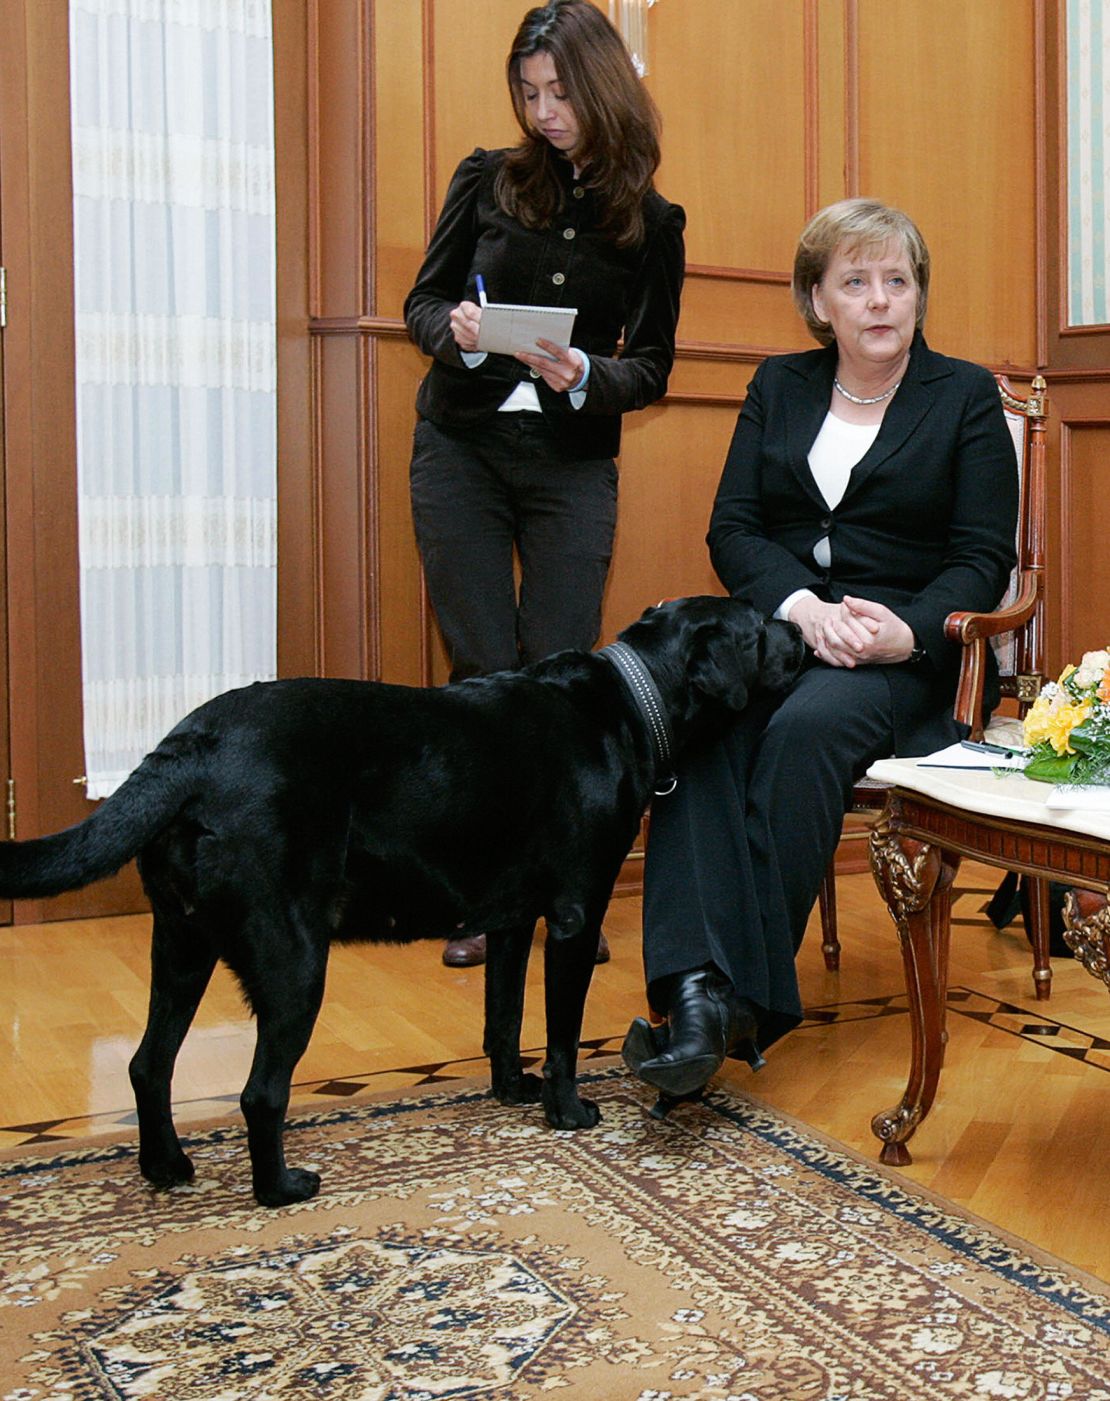 German Chancellor Angela Merkel looks uncomfortable as Russian President Vladimir Putin's dog comes close during a press conference in Sochi in January 2007.